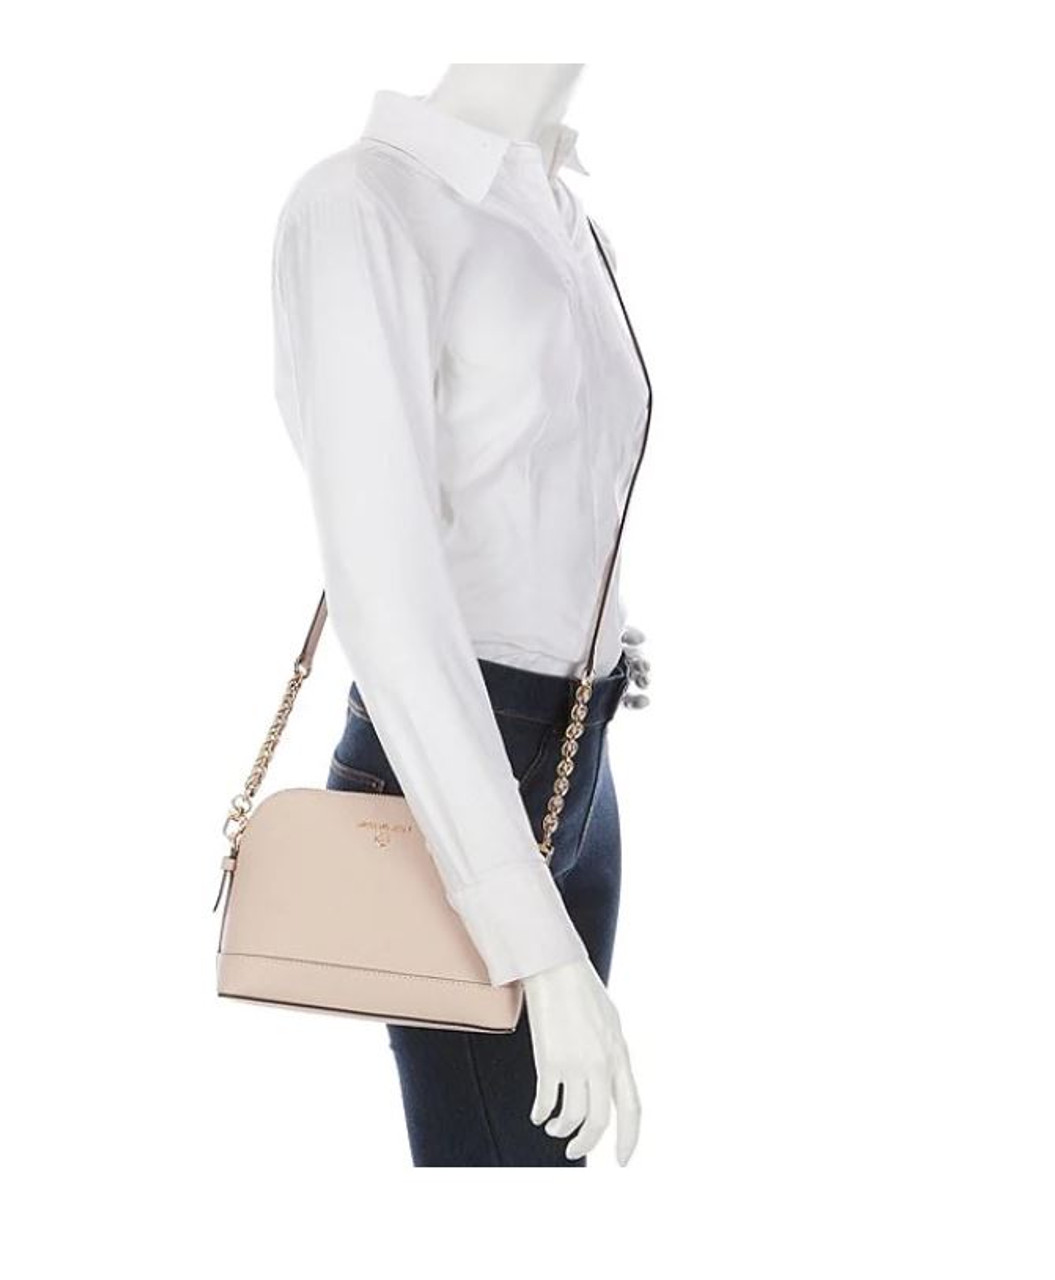 Michael+Kors+Half+Dome+Pebbled+Leather+Crossbody+Bag+in+Ultra+Pink